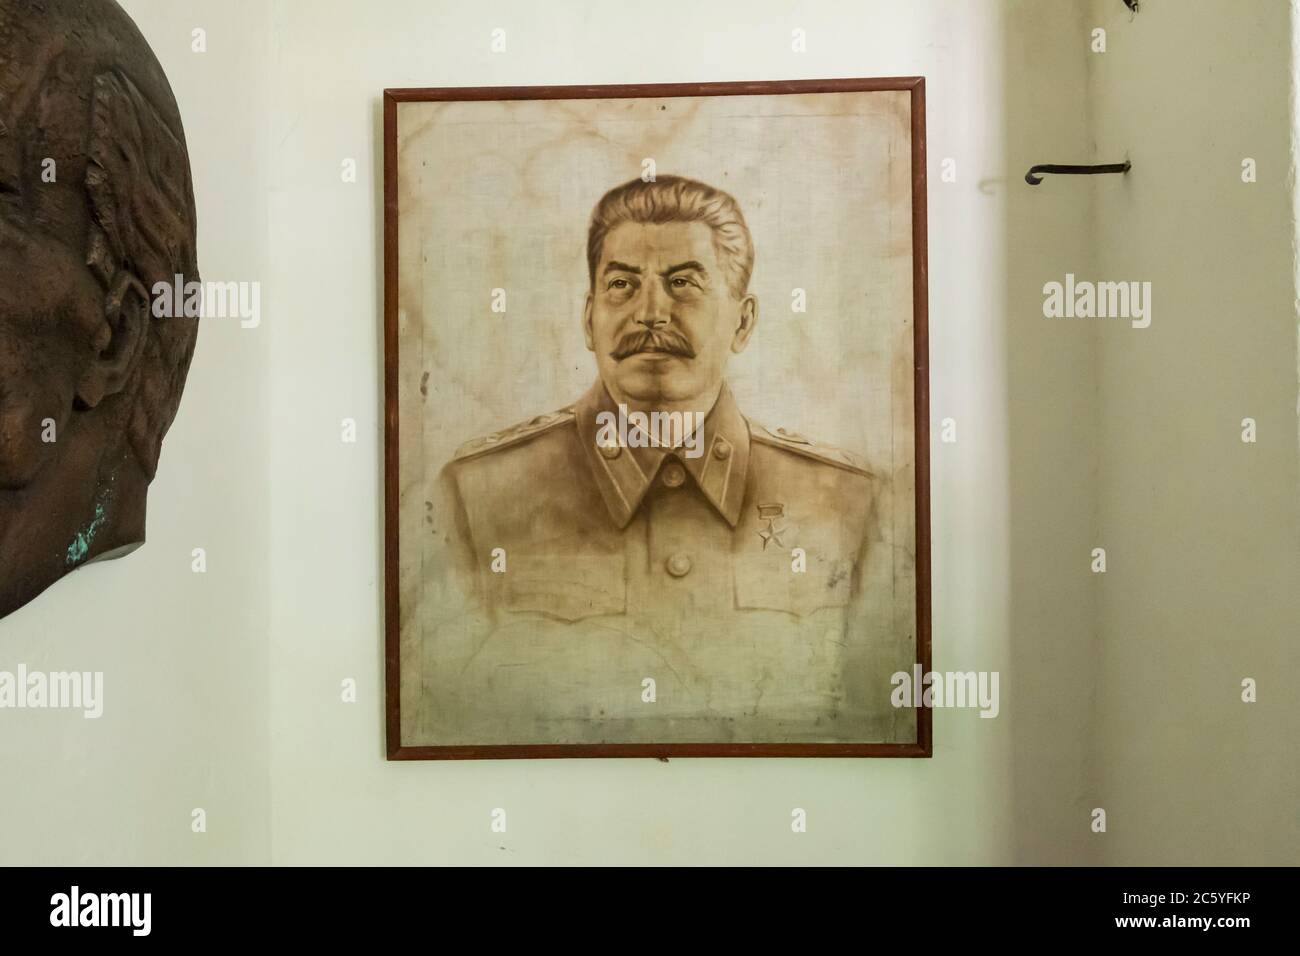 A drawing of Stalin hangs in the former prison building used by the German Nazis during WWII as a concentration camp headquarters. In Macikai, Lithuan Stock Photo